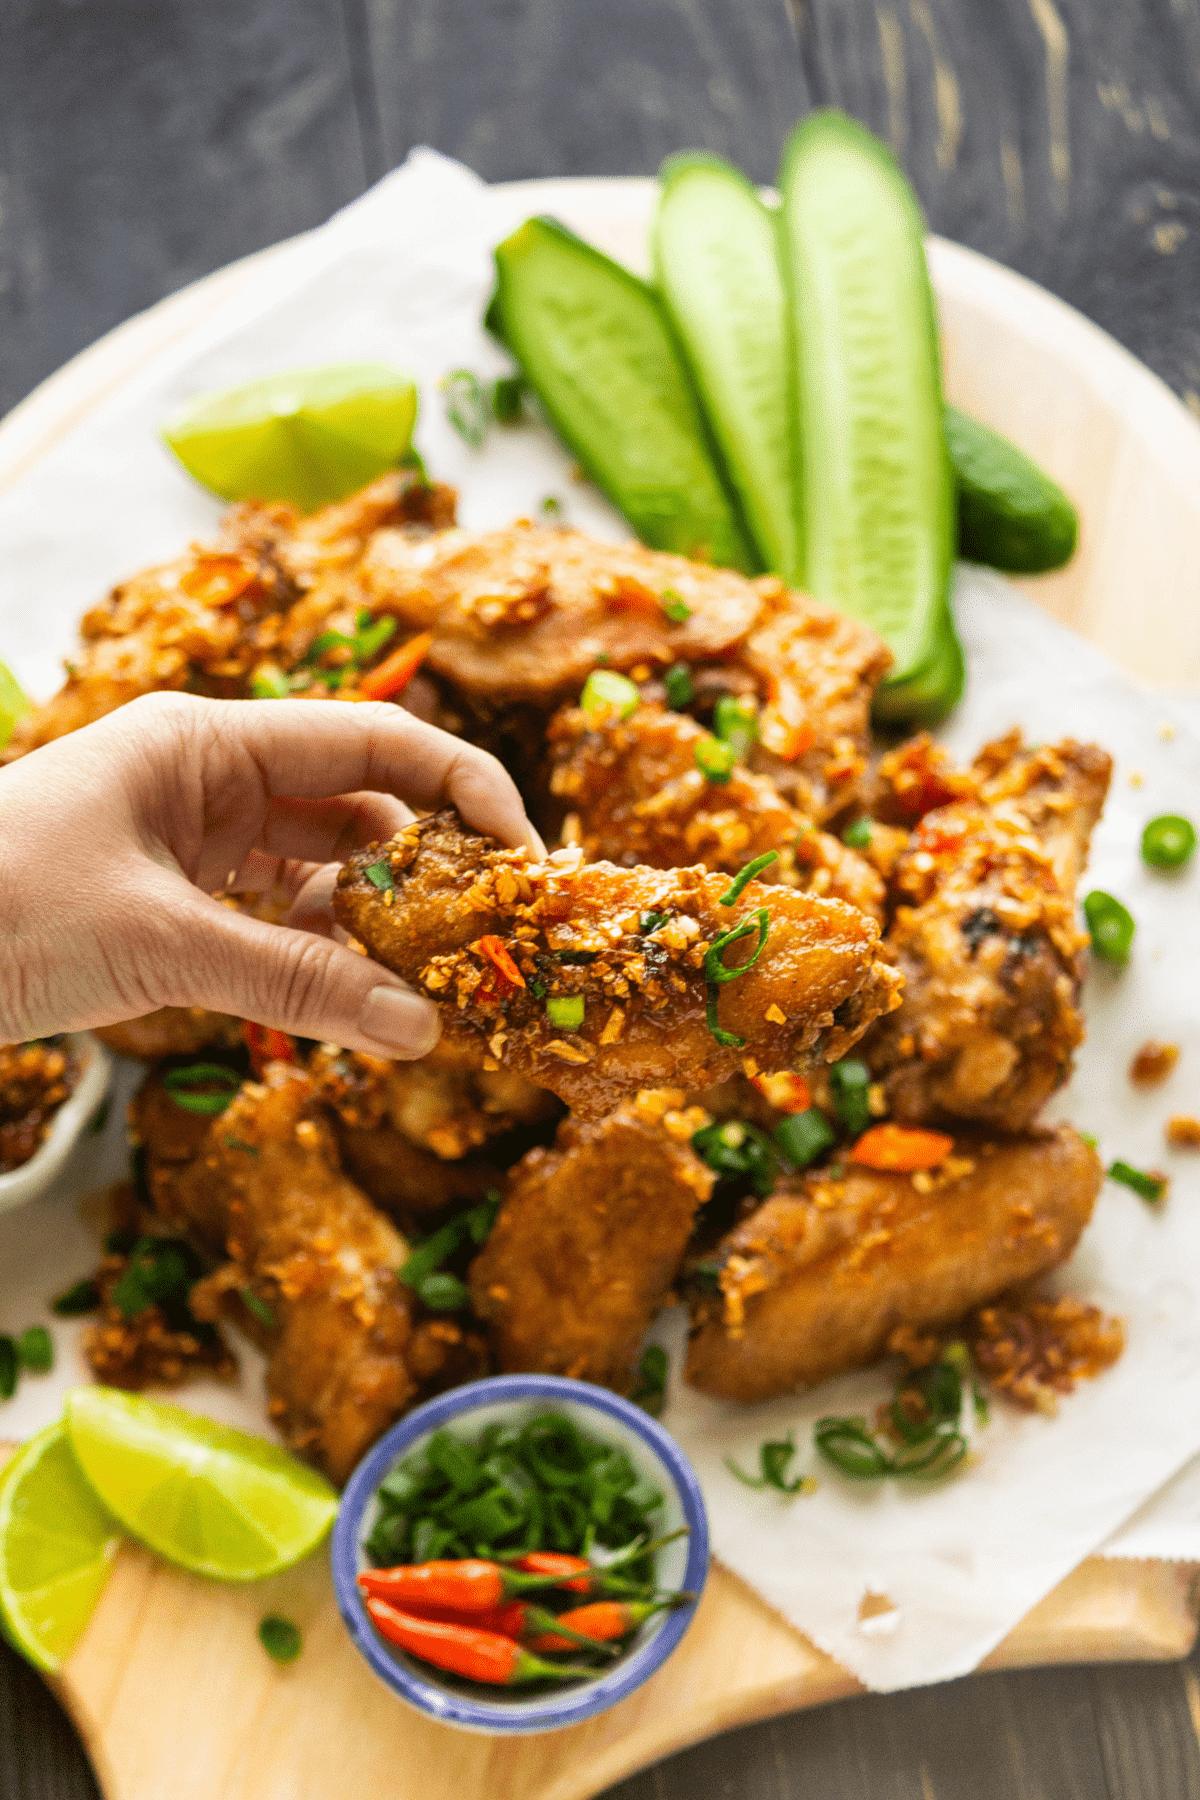 A hand holding a Fish Sauce Chicken Wing over a plate of fried wings.